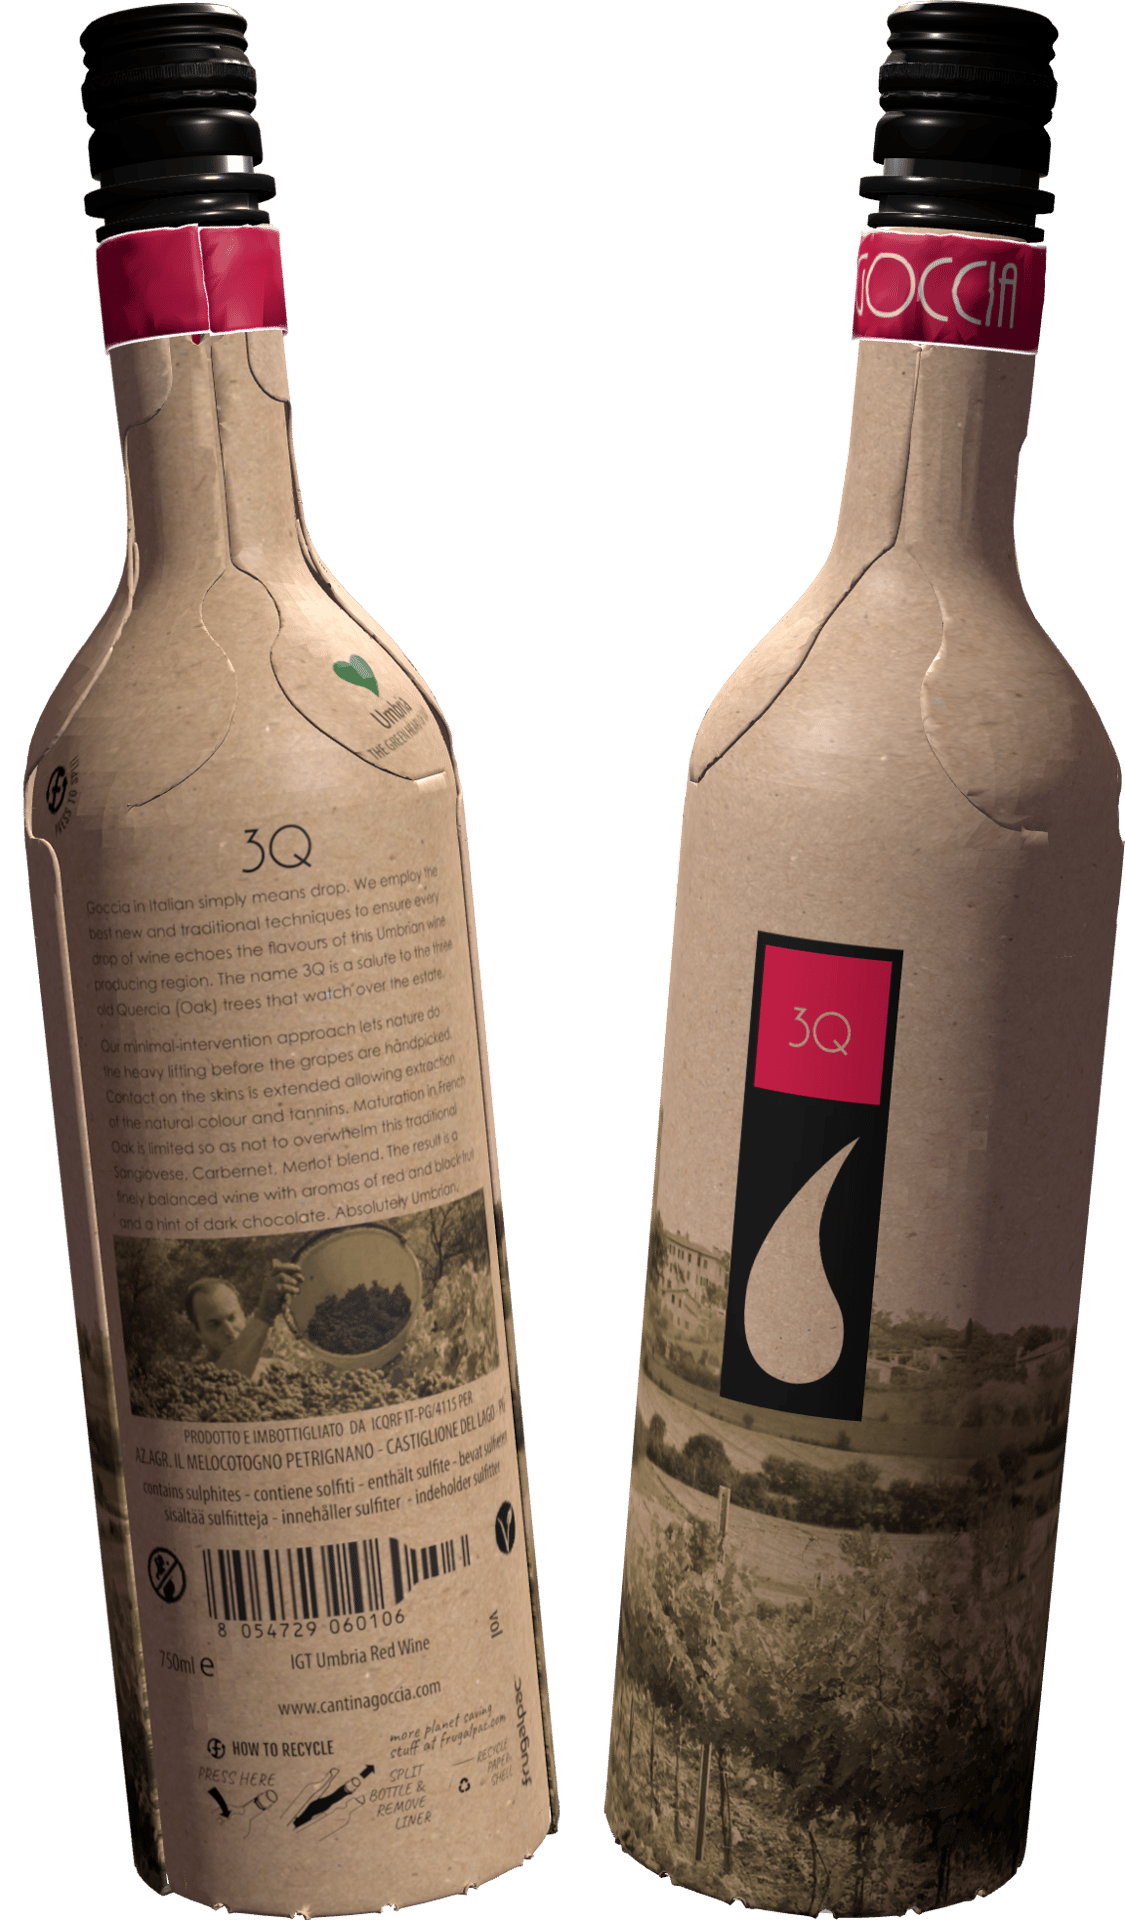 Frugal bottle - front and back views